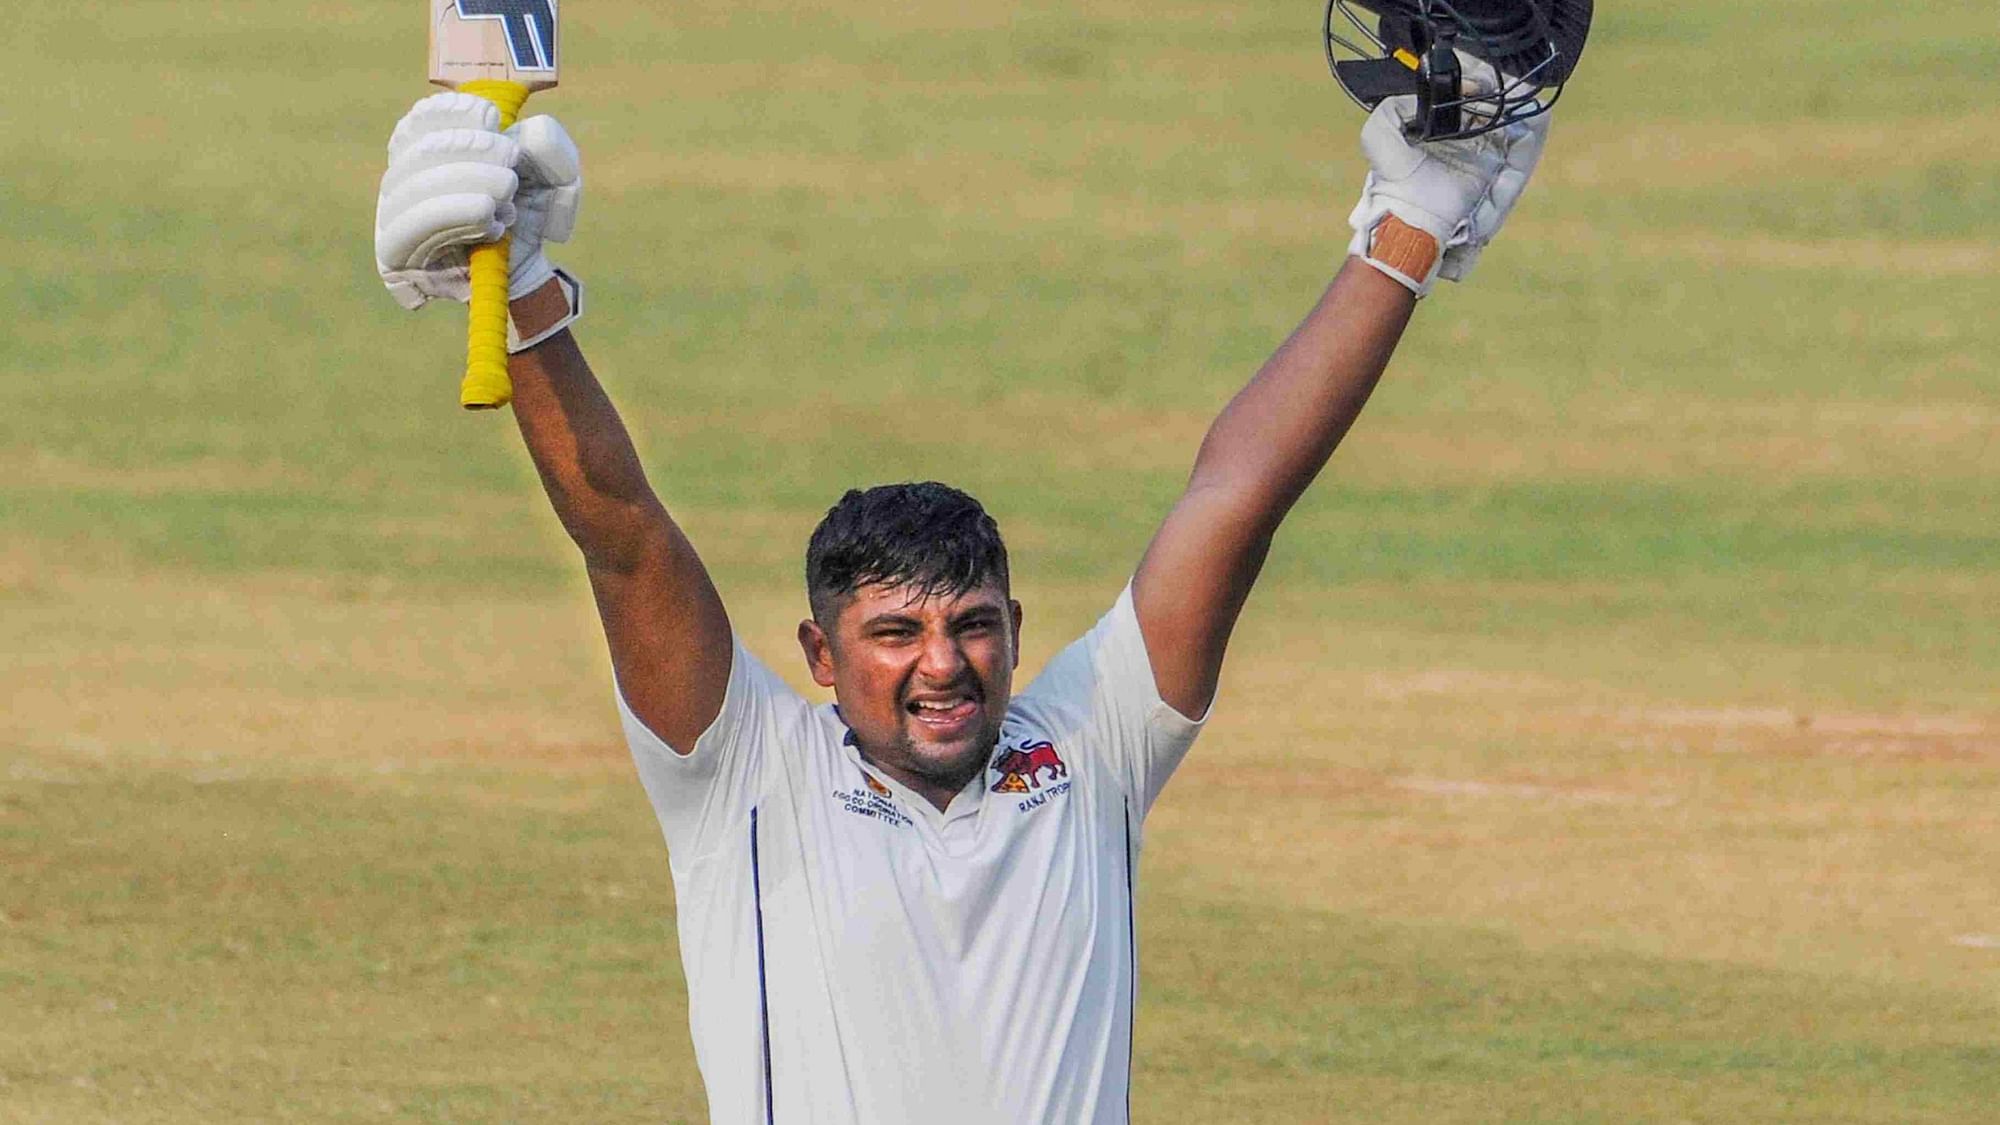 Sarfaraz Khan followed up his unbeaten triple hundred against Uttar Pradesh with a double hundred against Himachal Pradesh in the ongoing Ranji Trophy.